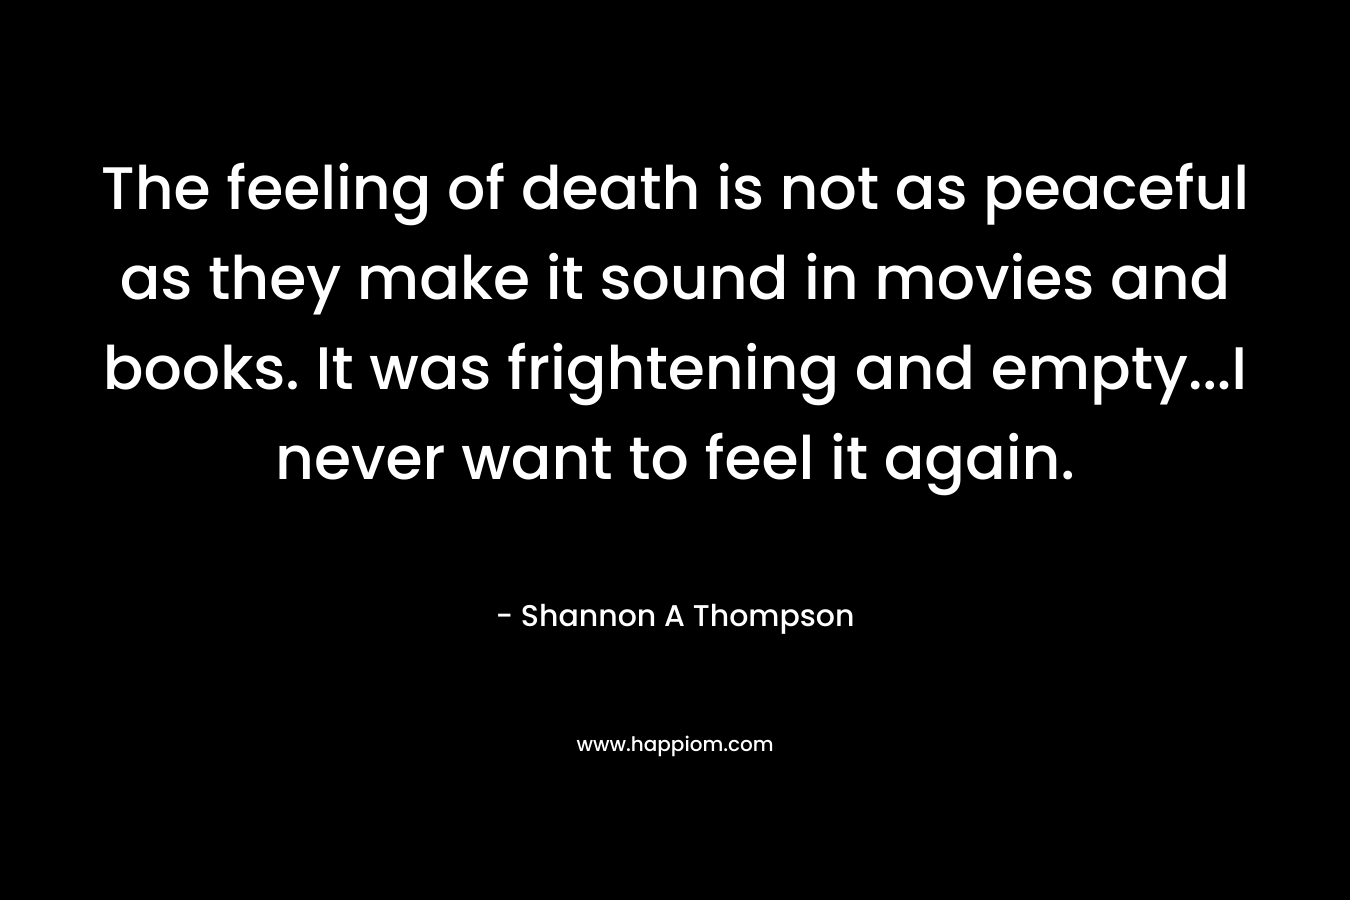 The feeling of death is not as peaceful as they make it sound in movies and books. It was frightening and empty…I never want to feel it again. – Shannon A Thompson